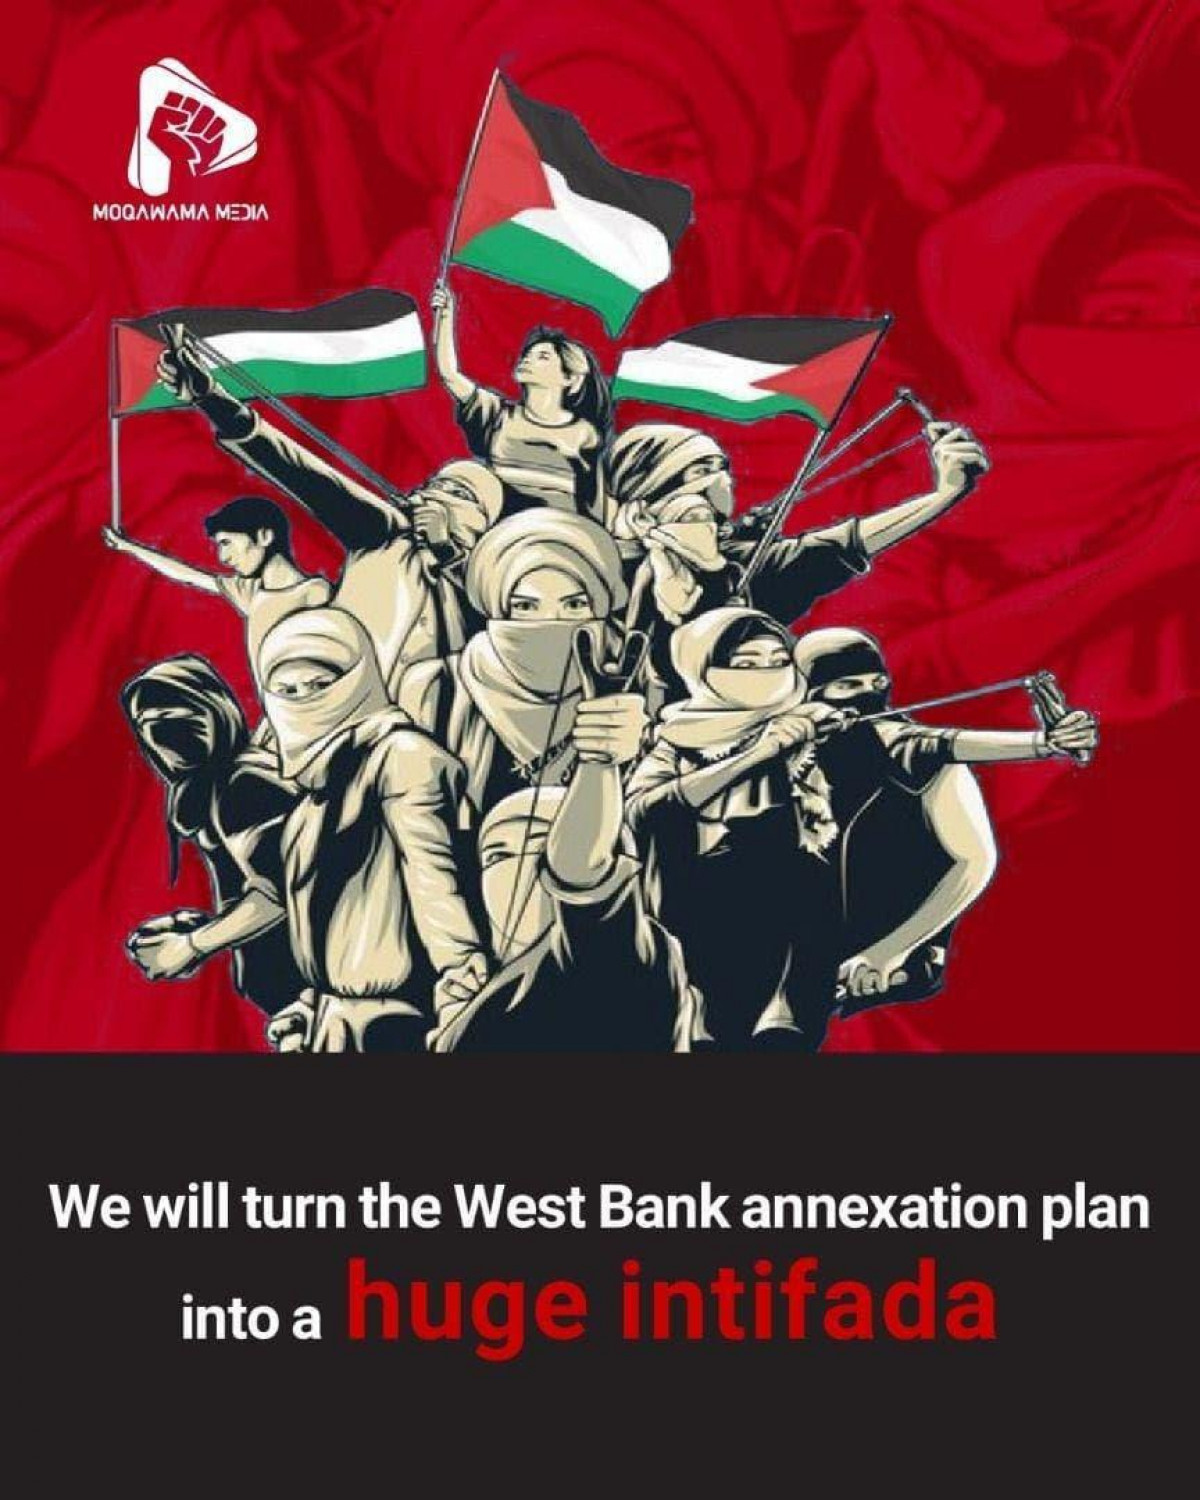 We will turn the West Bank annexation plan into a huge intifada